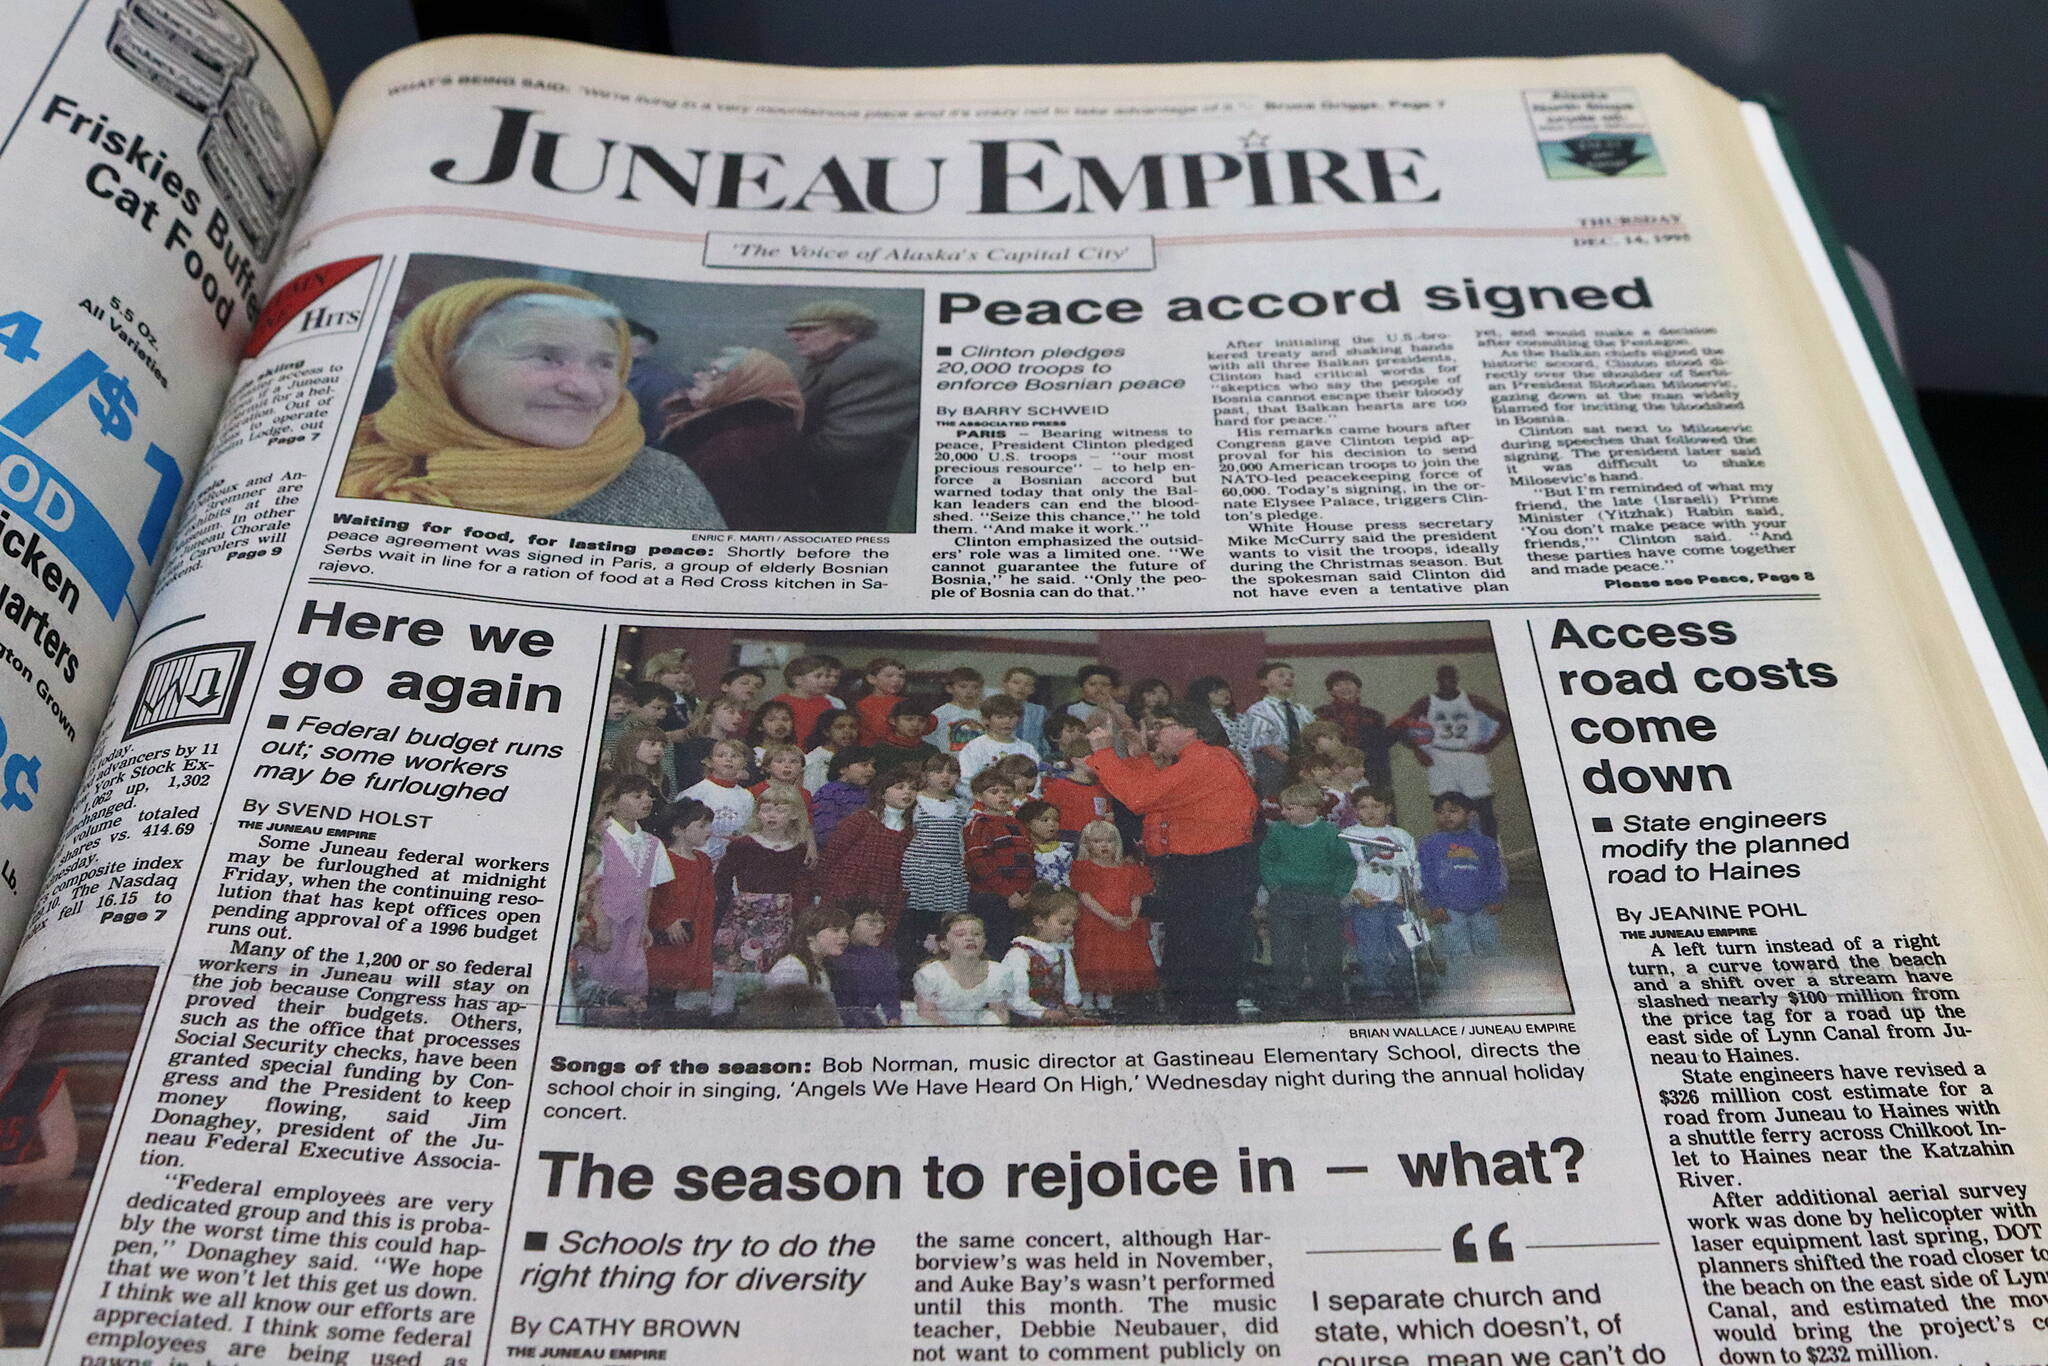 The front page of the Juneau Empire on Dec. 14, 1995. (Mark Sabbatini / Juneau Empire)